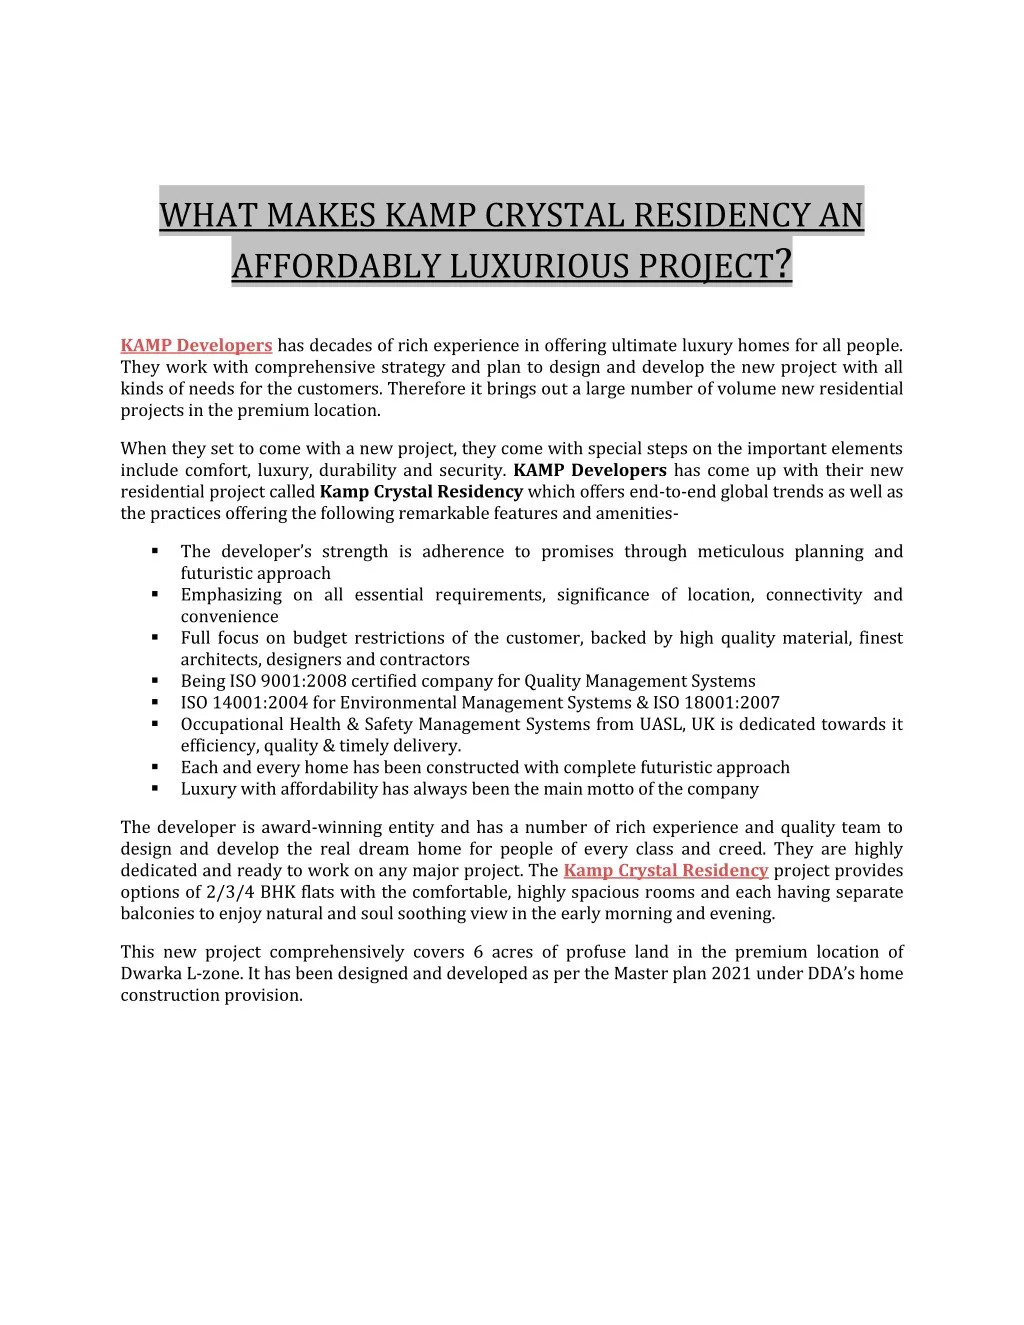 what makes kamp crystal residency an affordably